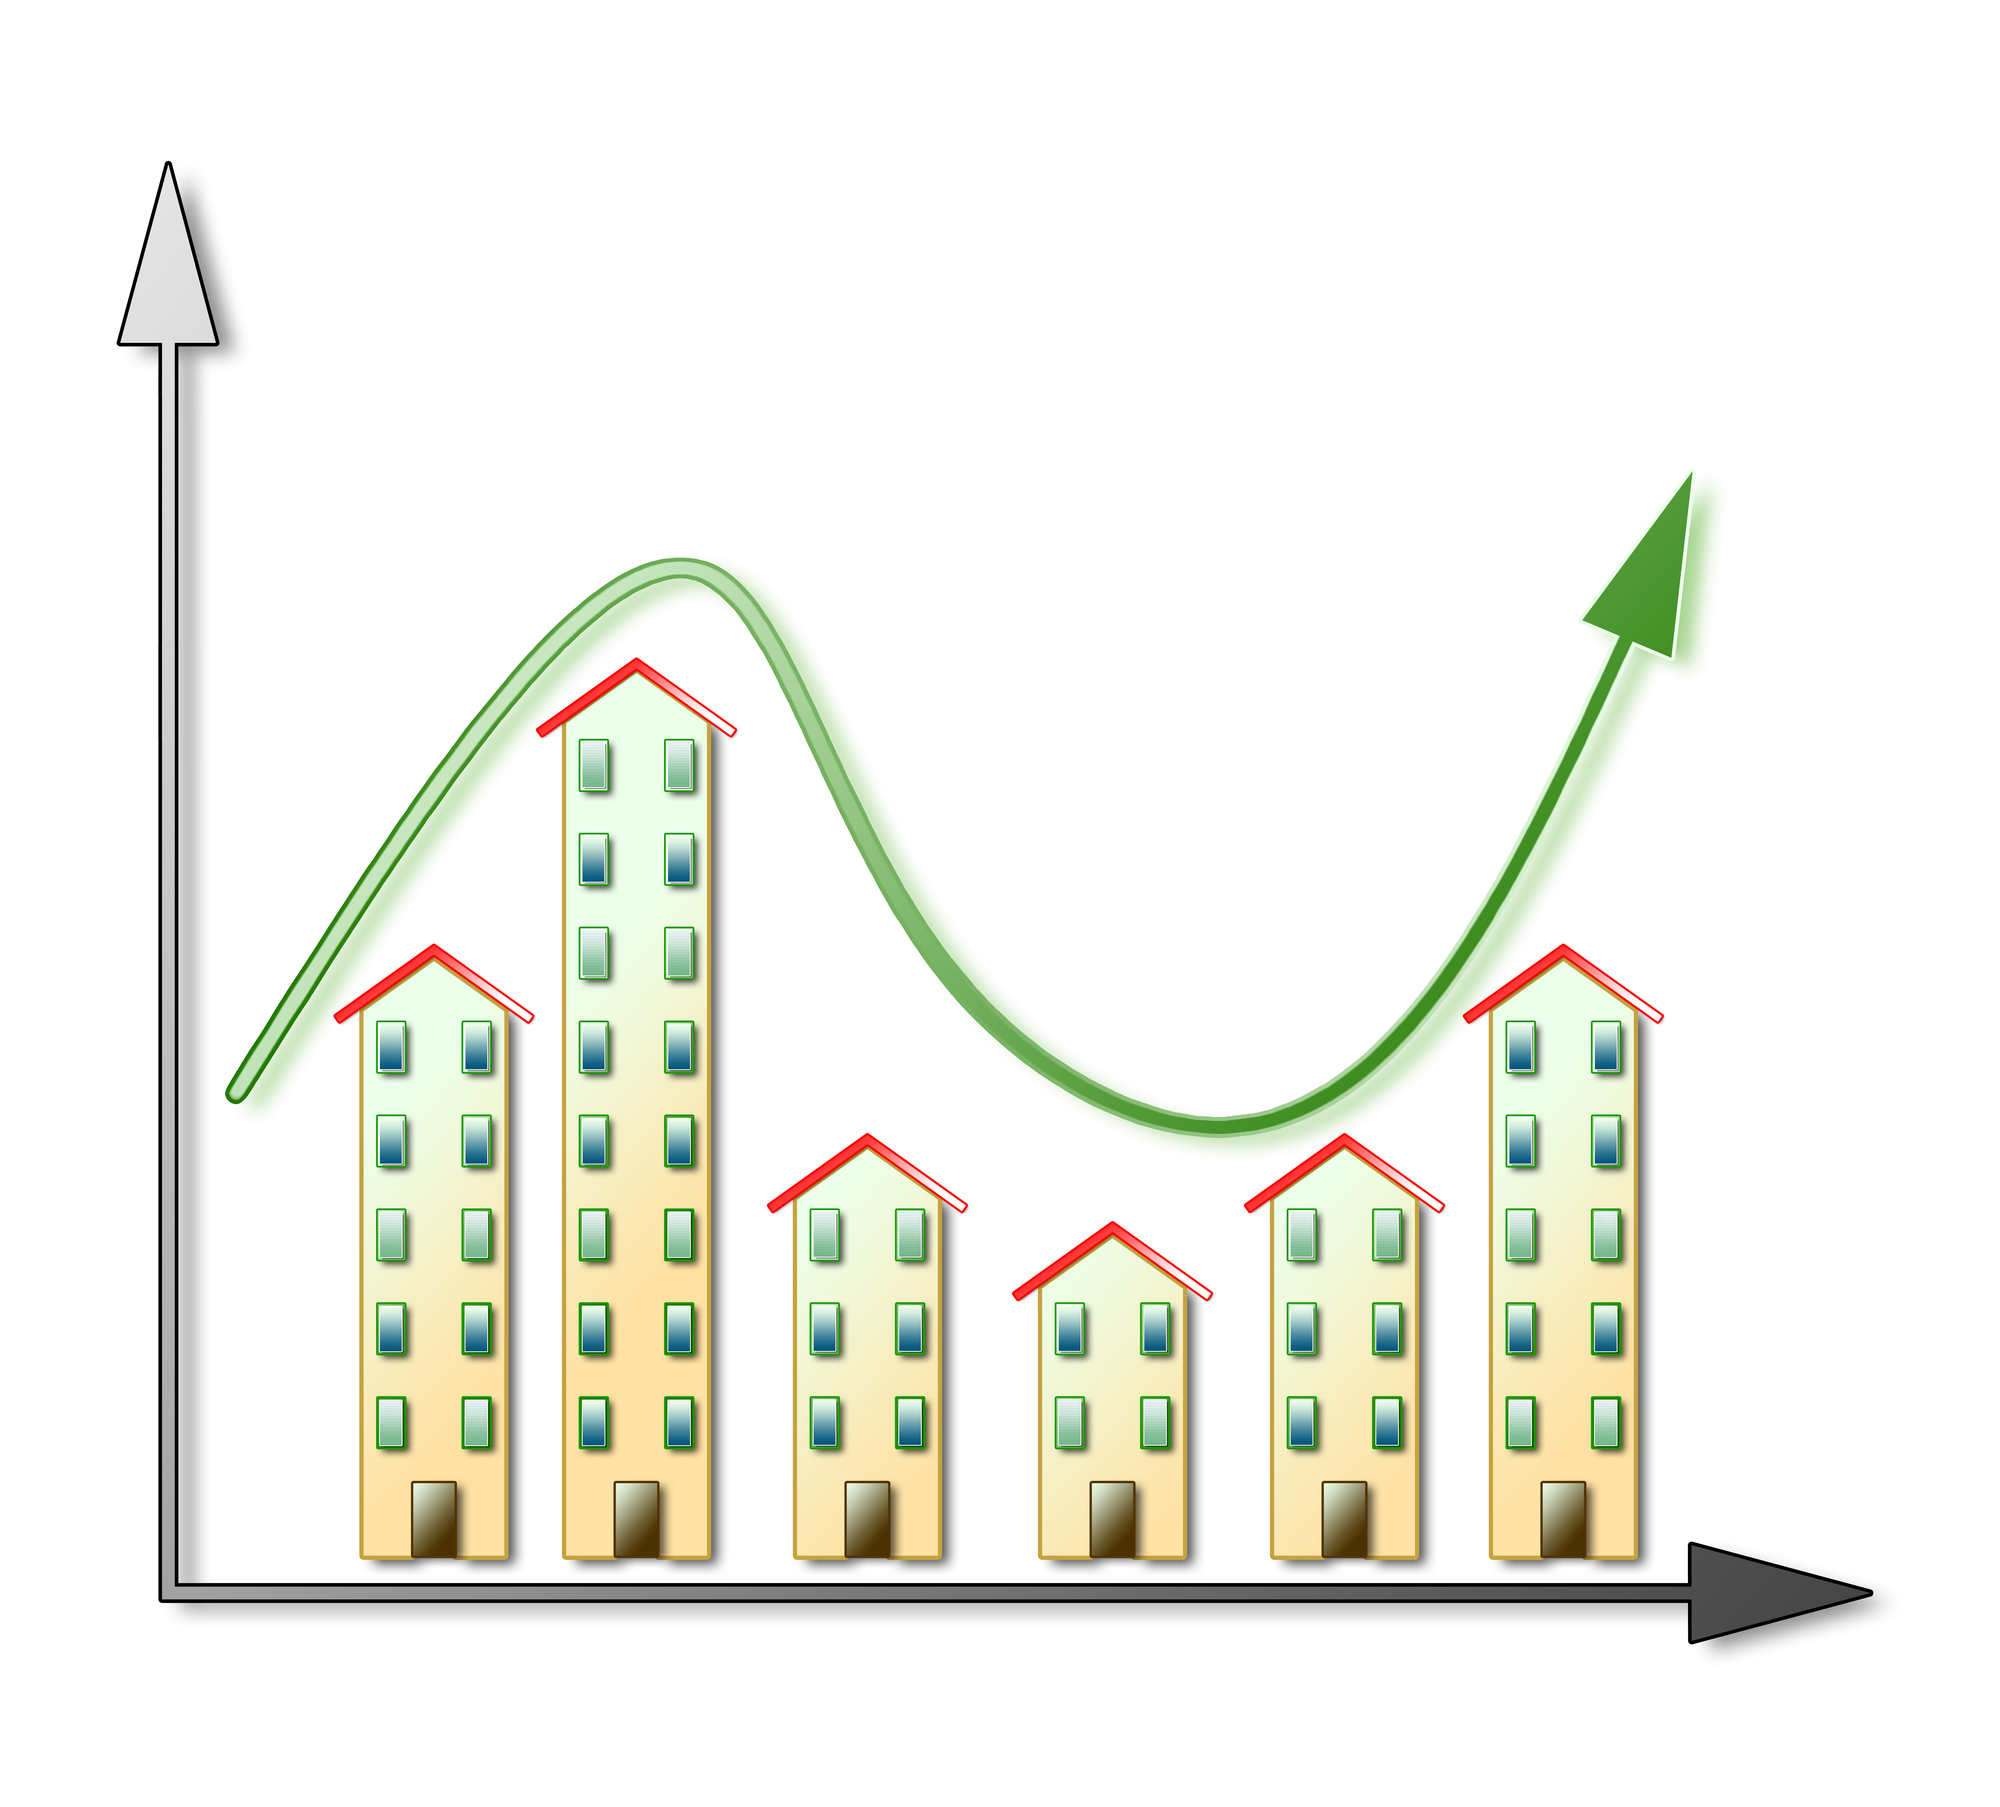 Fluctuation of the housing market - real estate market concept